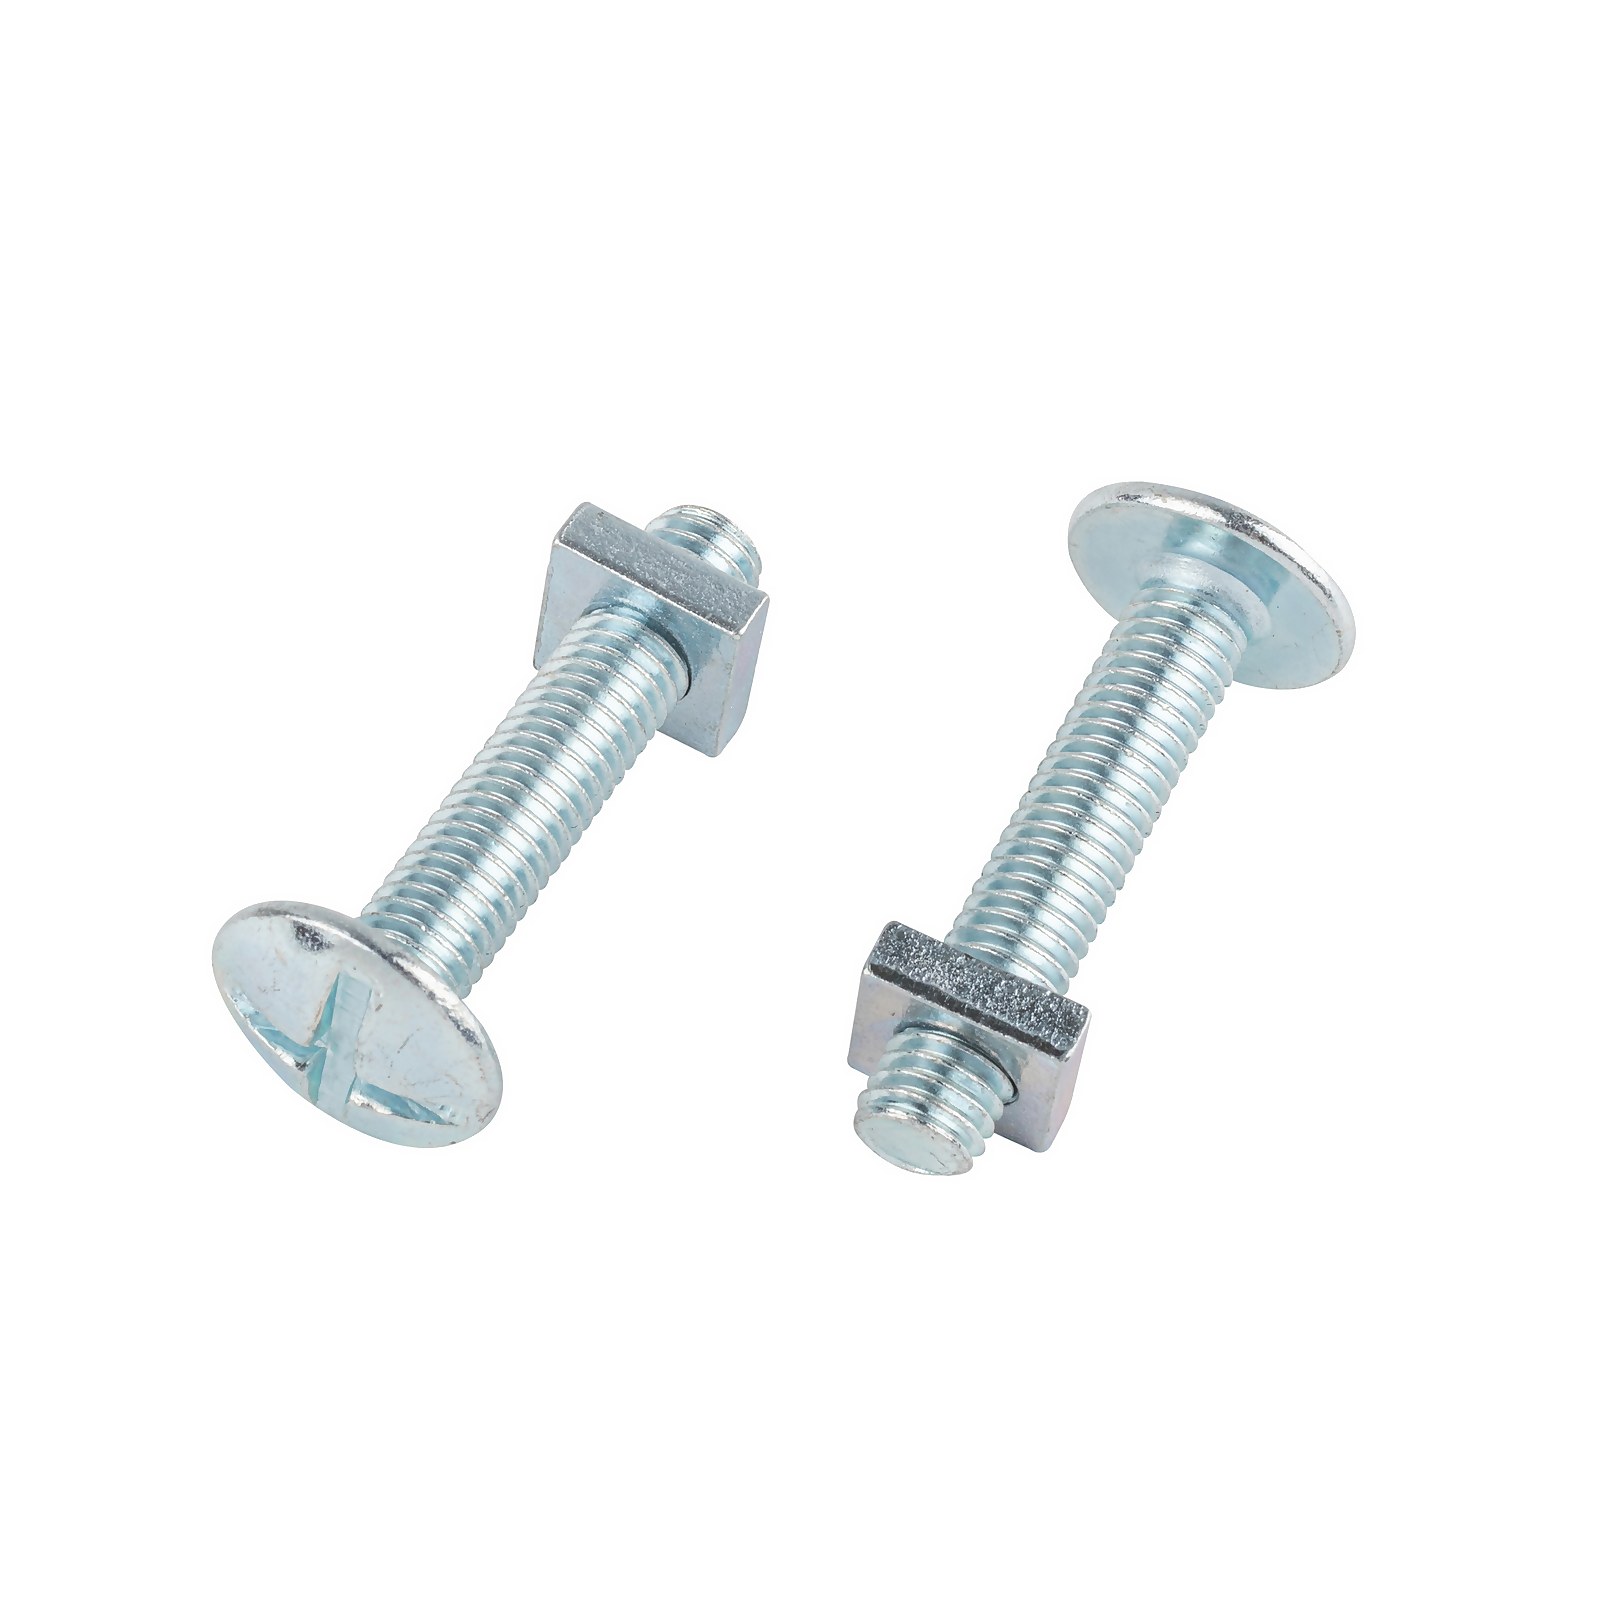 Photo of Homebase Zinc Plated Roof Bolt M8 40mm 10 Pack